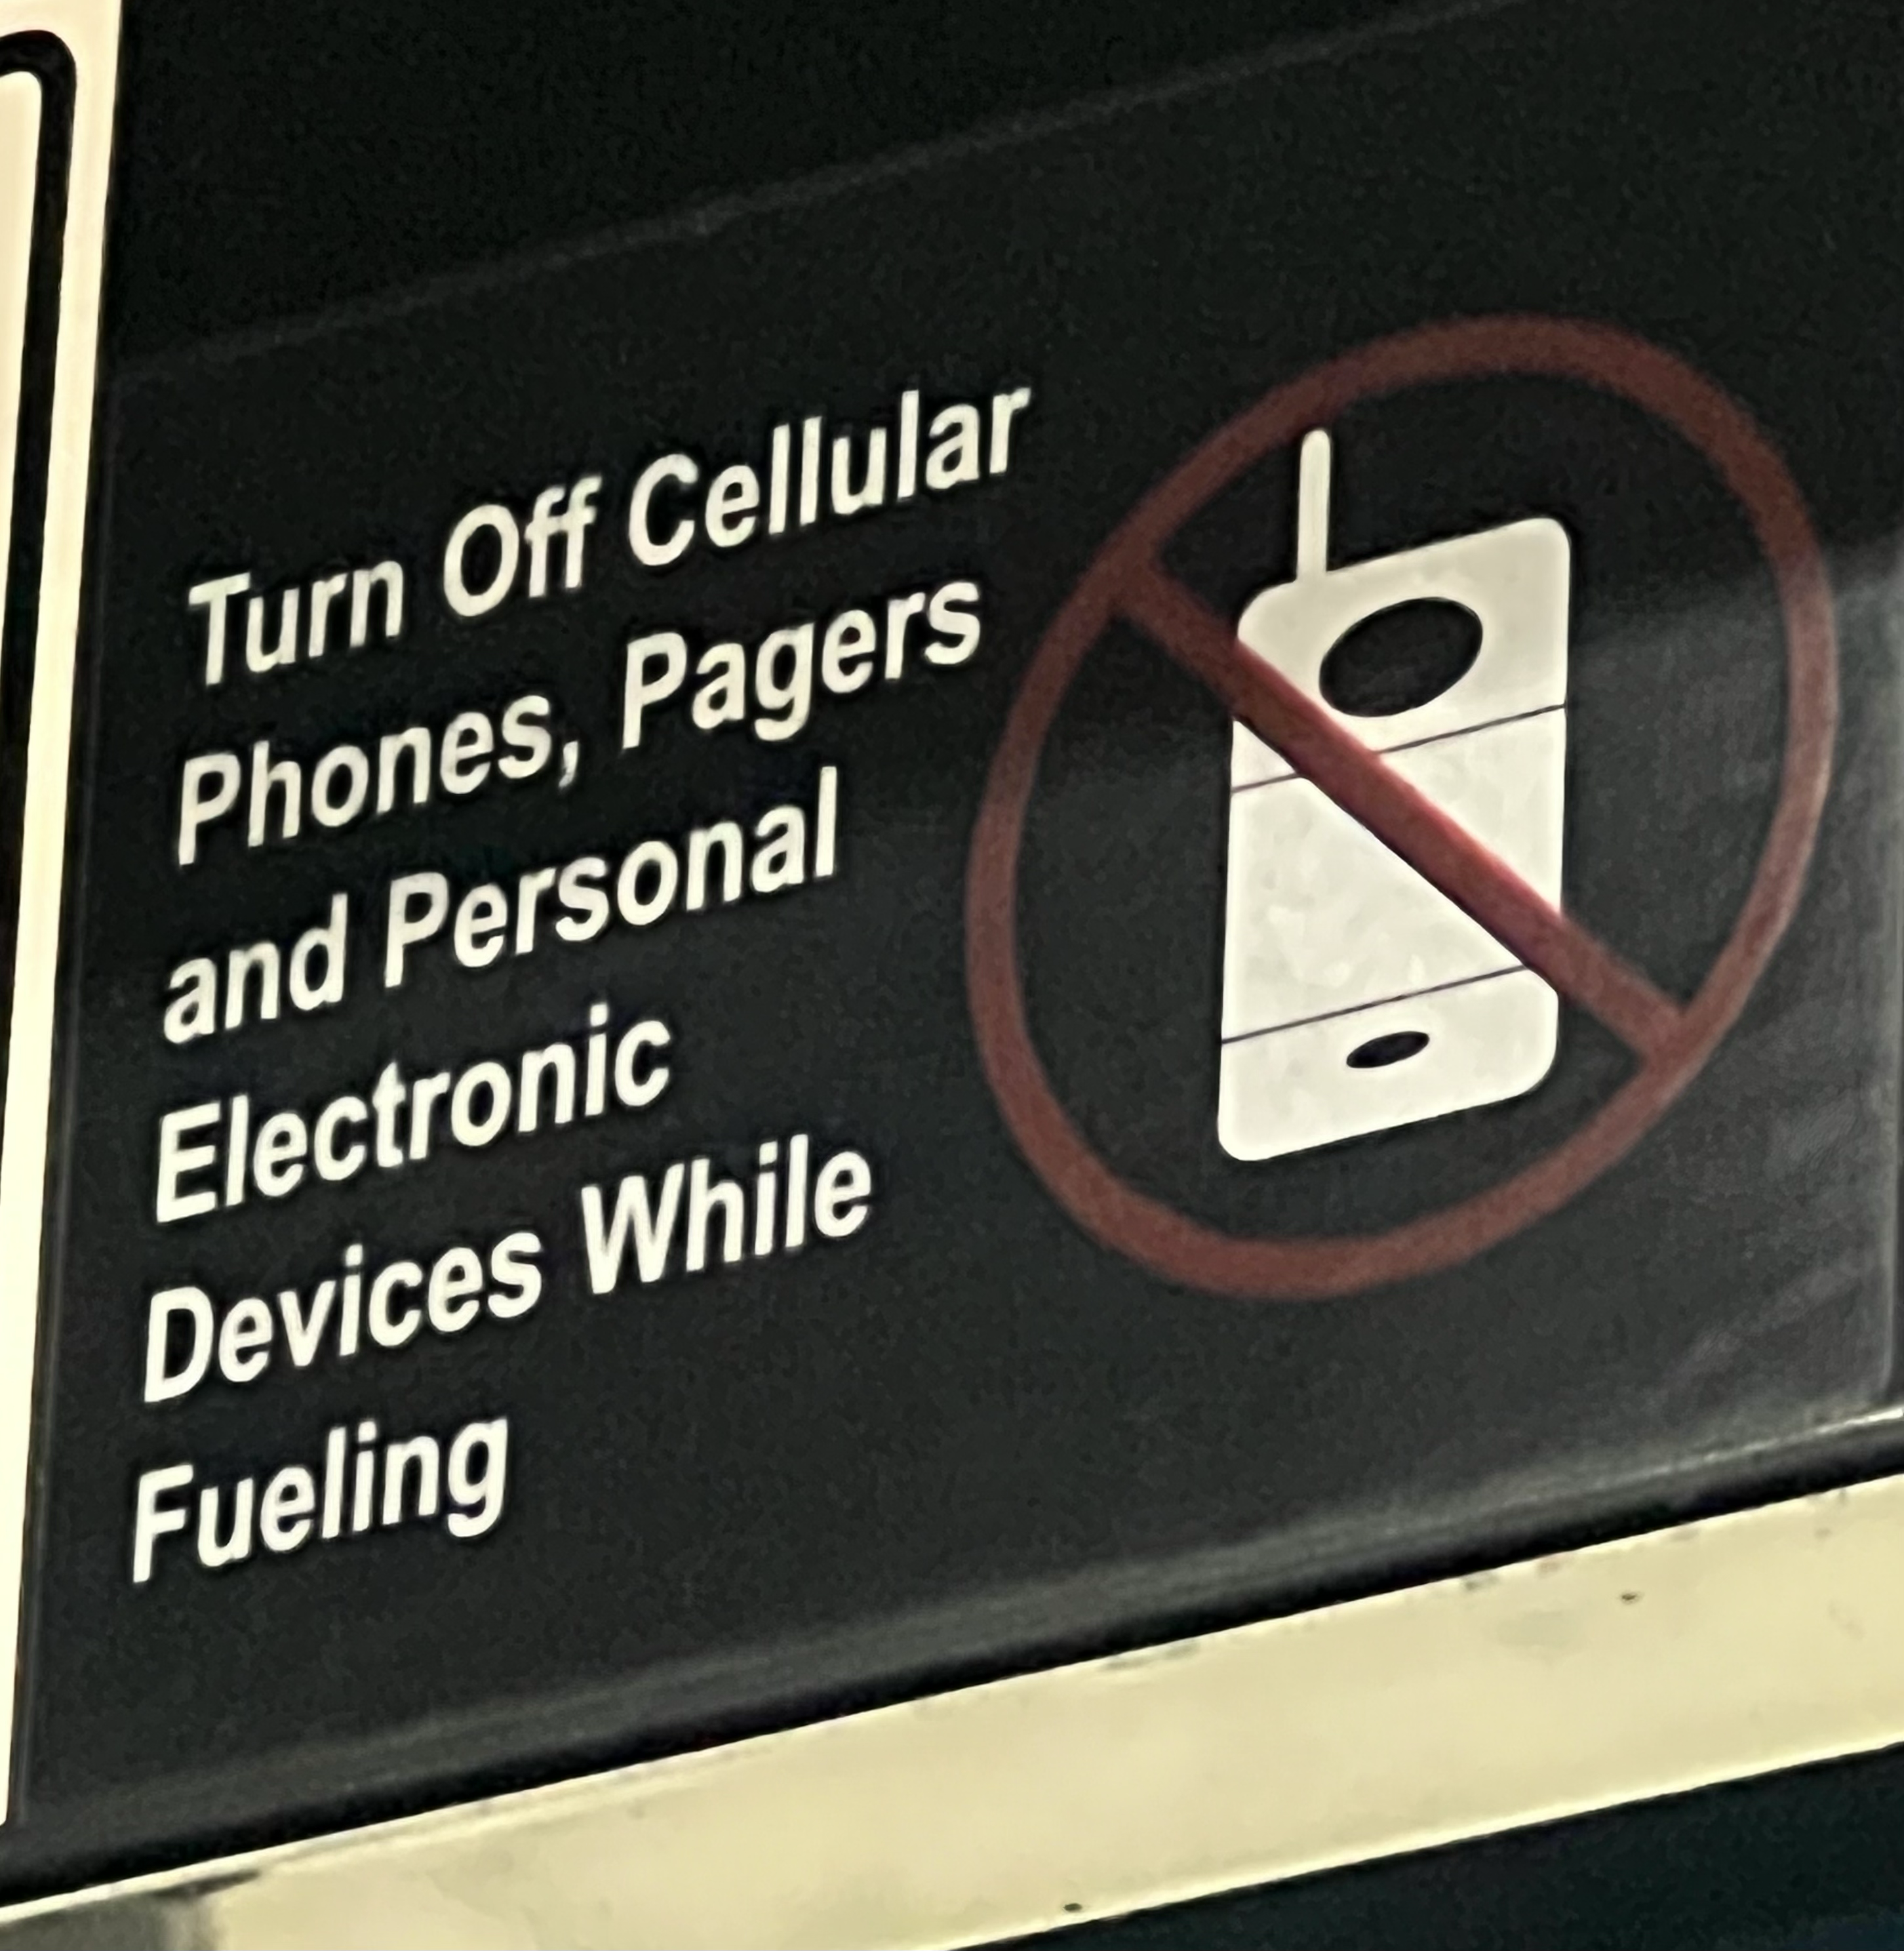 Gas station sign that says “Turn off cellular phones, pagers, and personal electronic devices while fueling.” Next to it is an image of an old cell phone with a line through it.